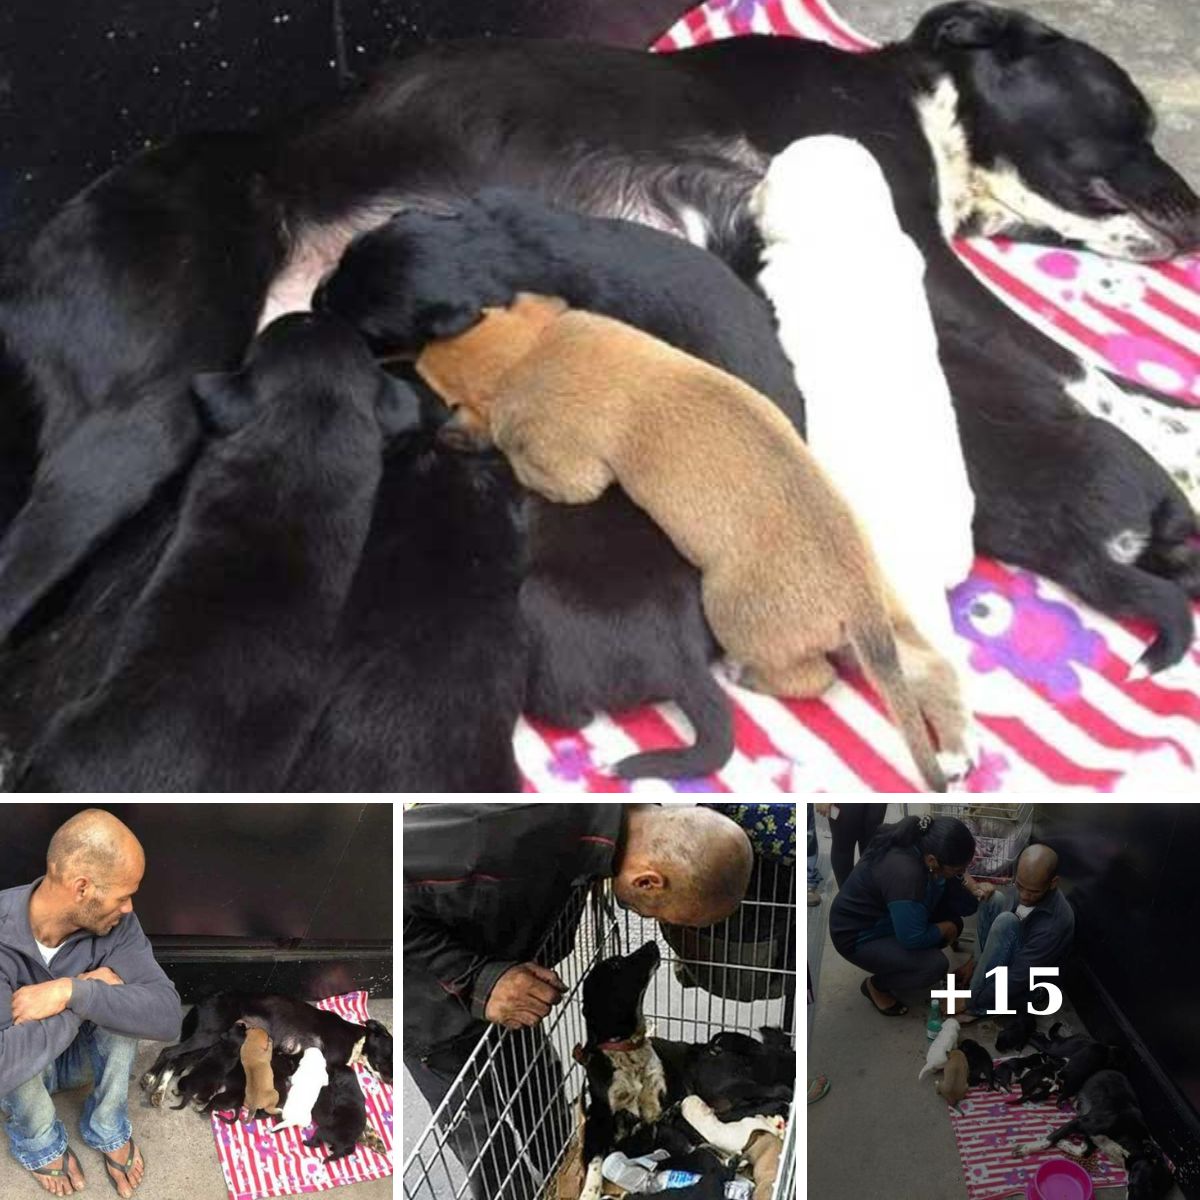 “Selfless Act: Man Gives Up Belongings to Save Dog and Her Puppies”